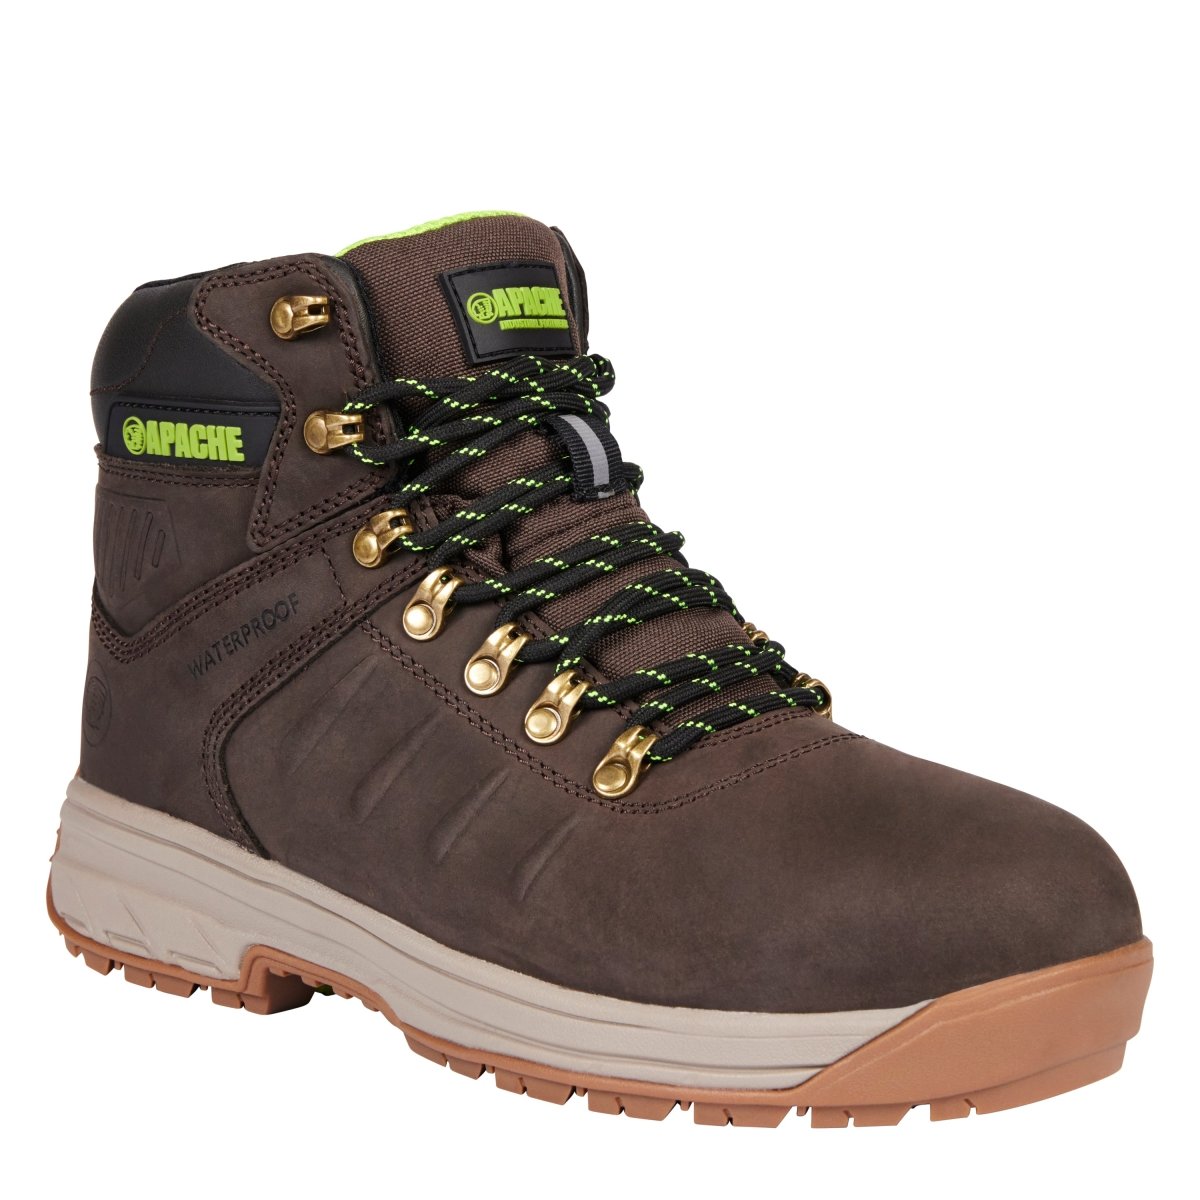 Apache Moose Jaw Leather Waterproof Safety Boot - Shoe Store Direct